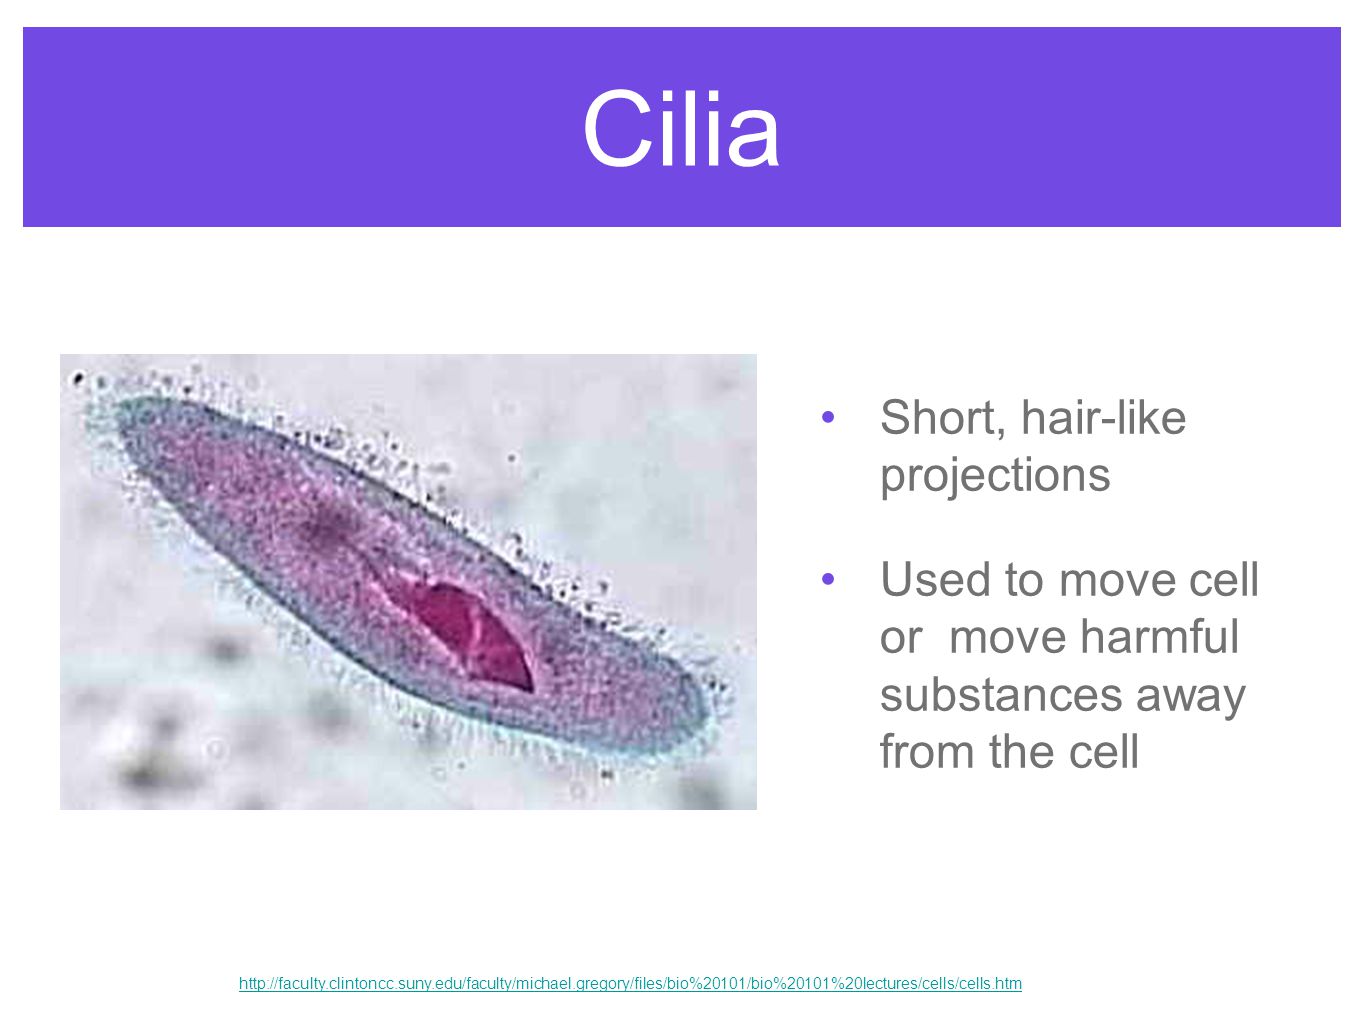 Cilia Short, hair-like projections Used to move cell or move harmful substances away from the cell